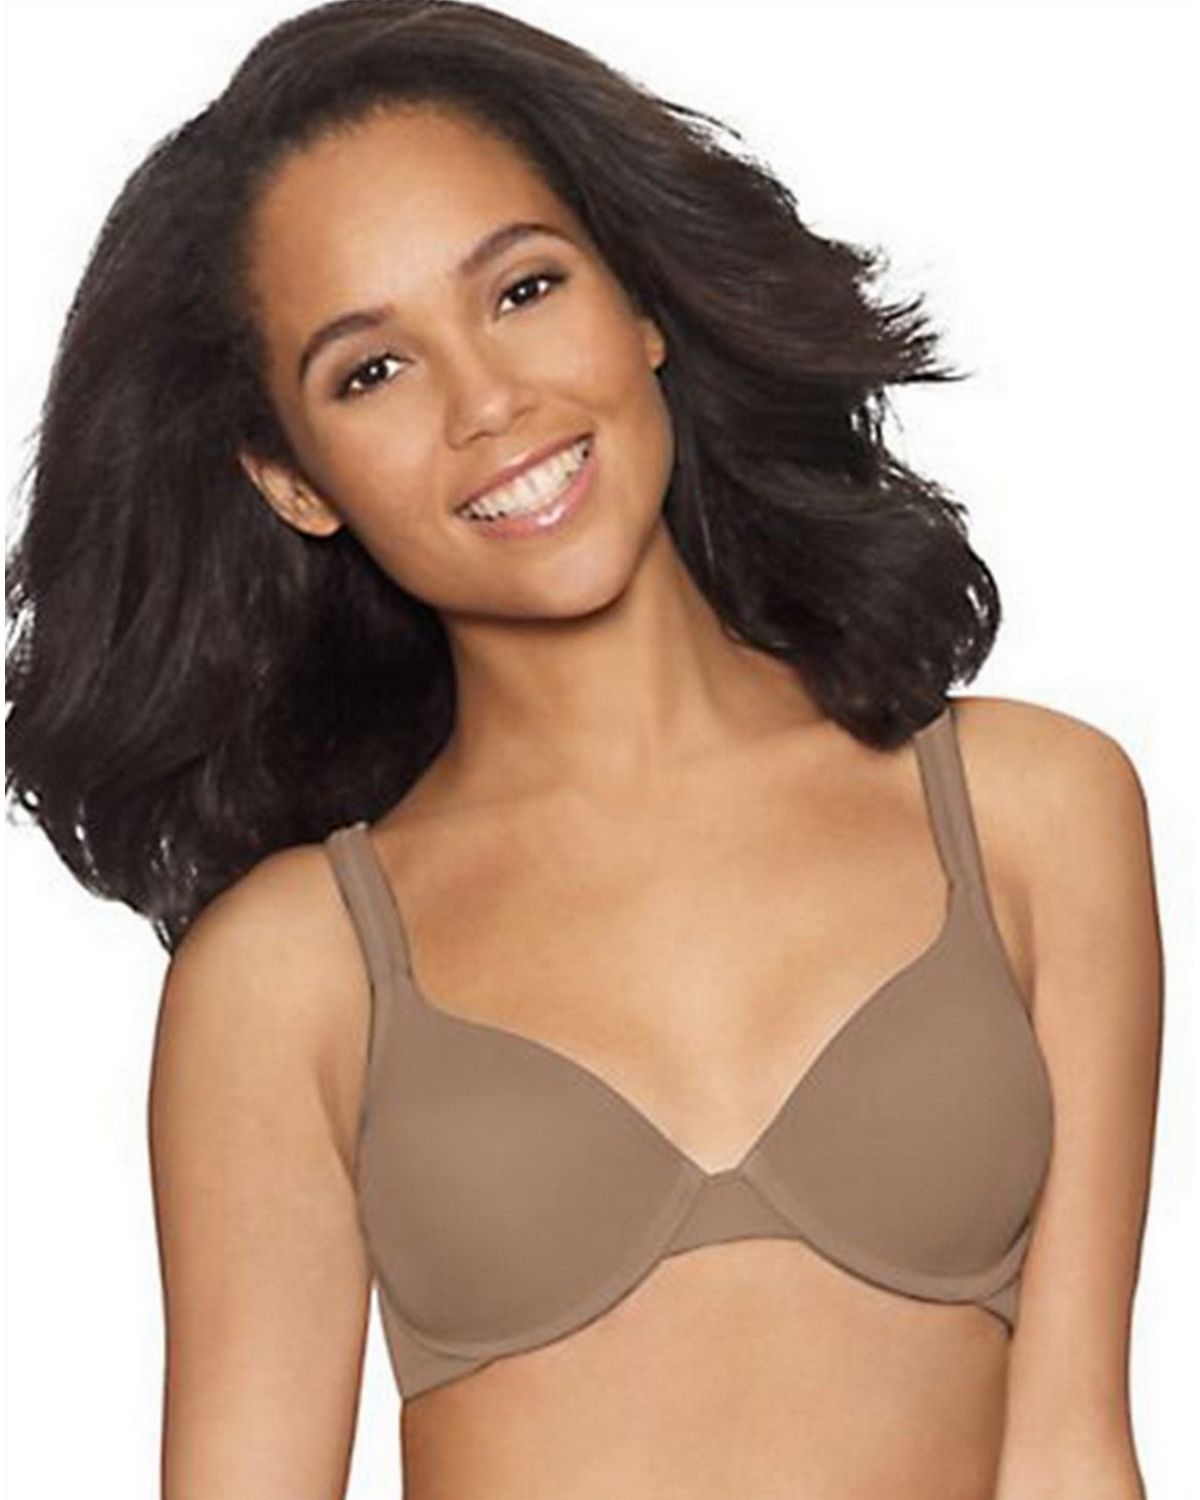 Hanes Fit PerfectionLift Comfort Shape Underwire Bra-G889